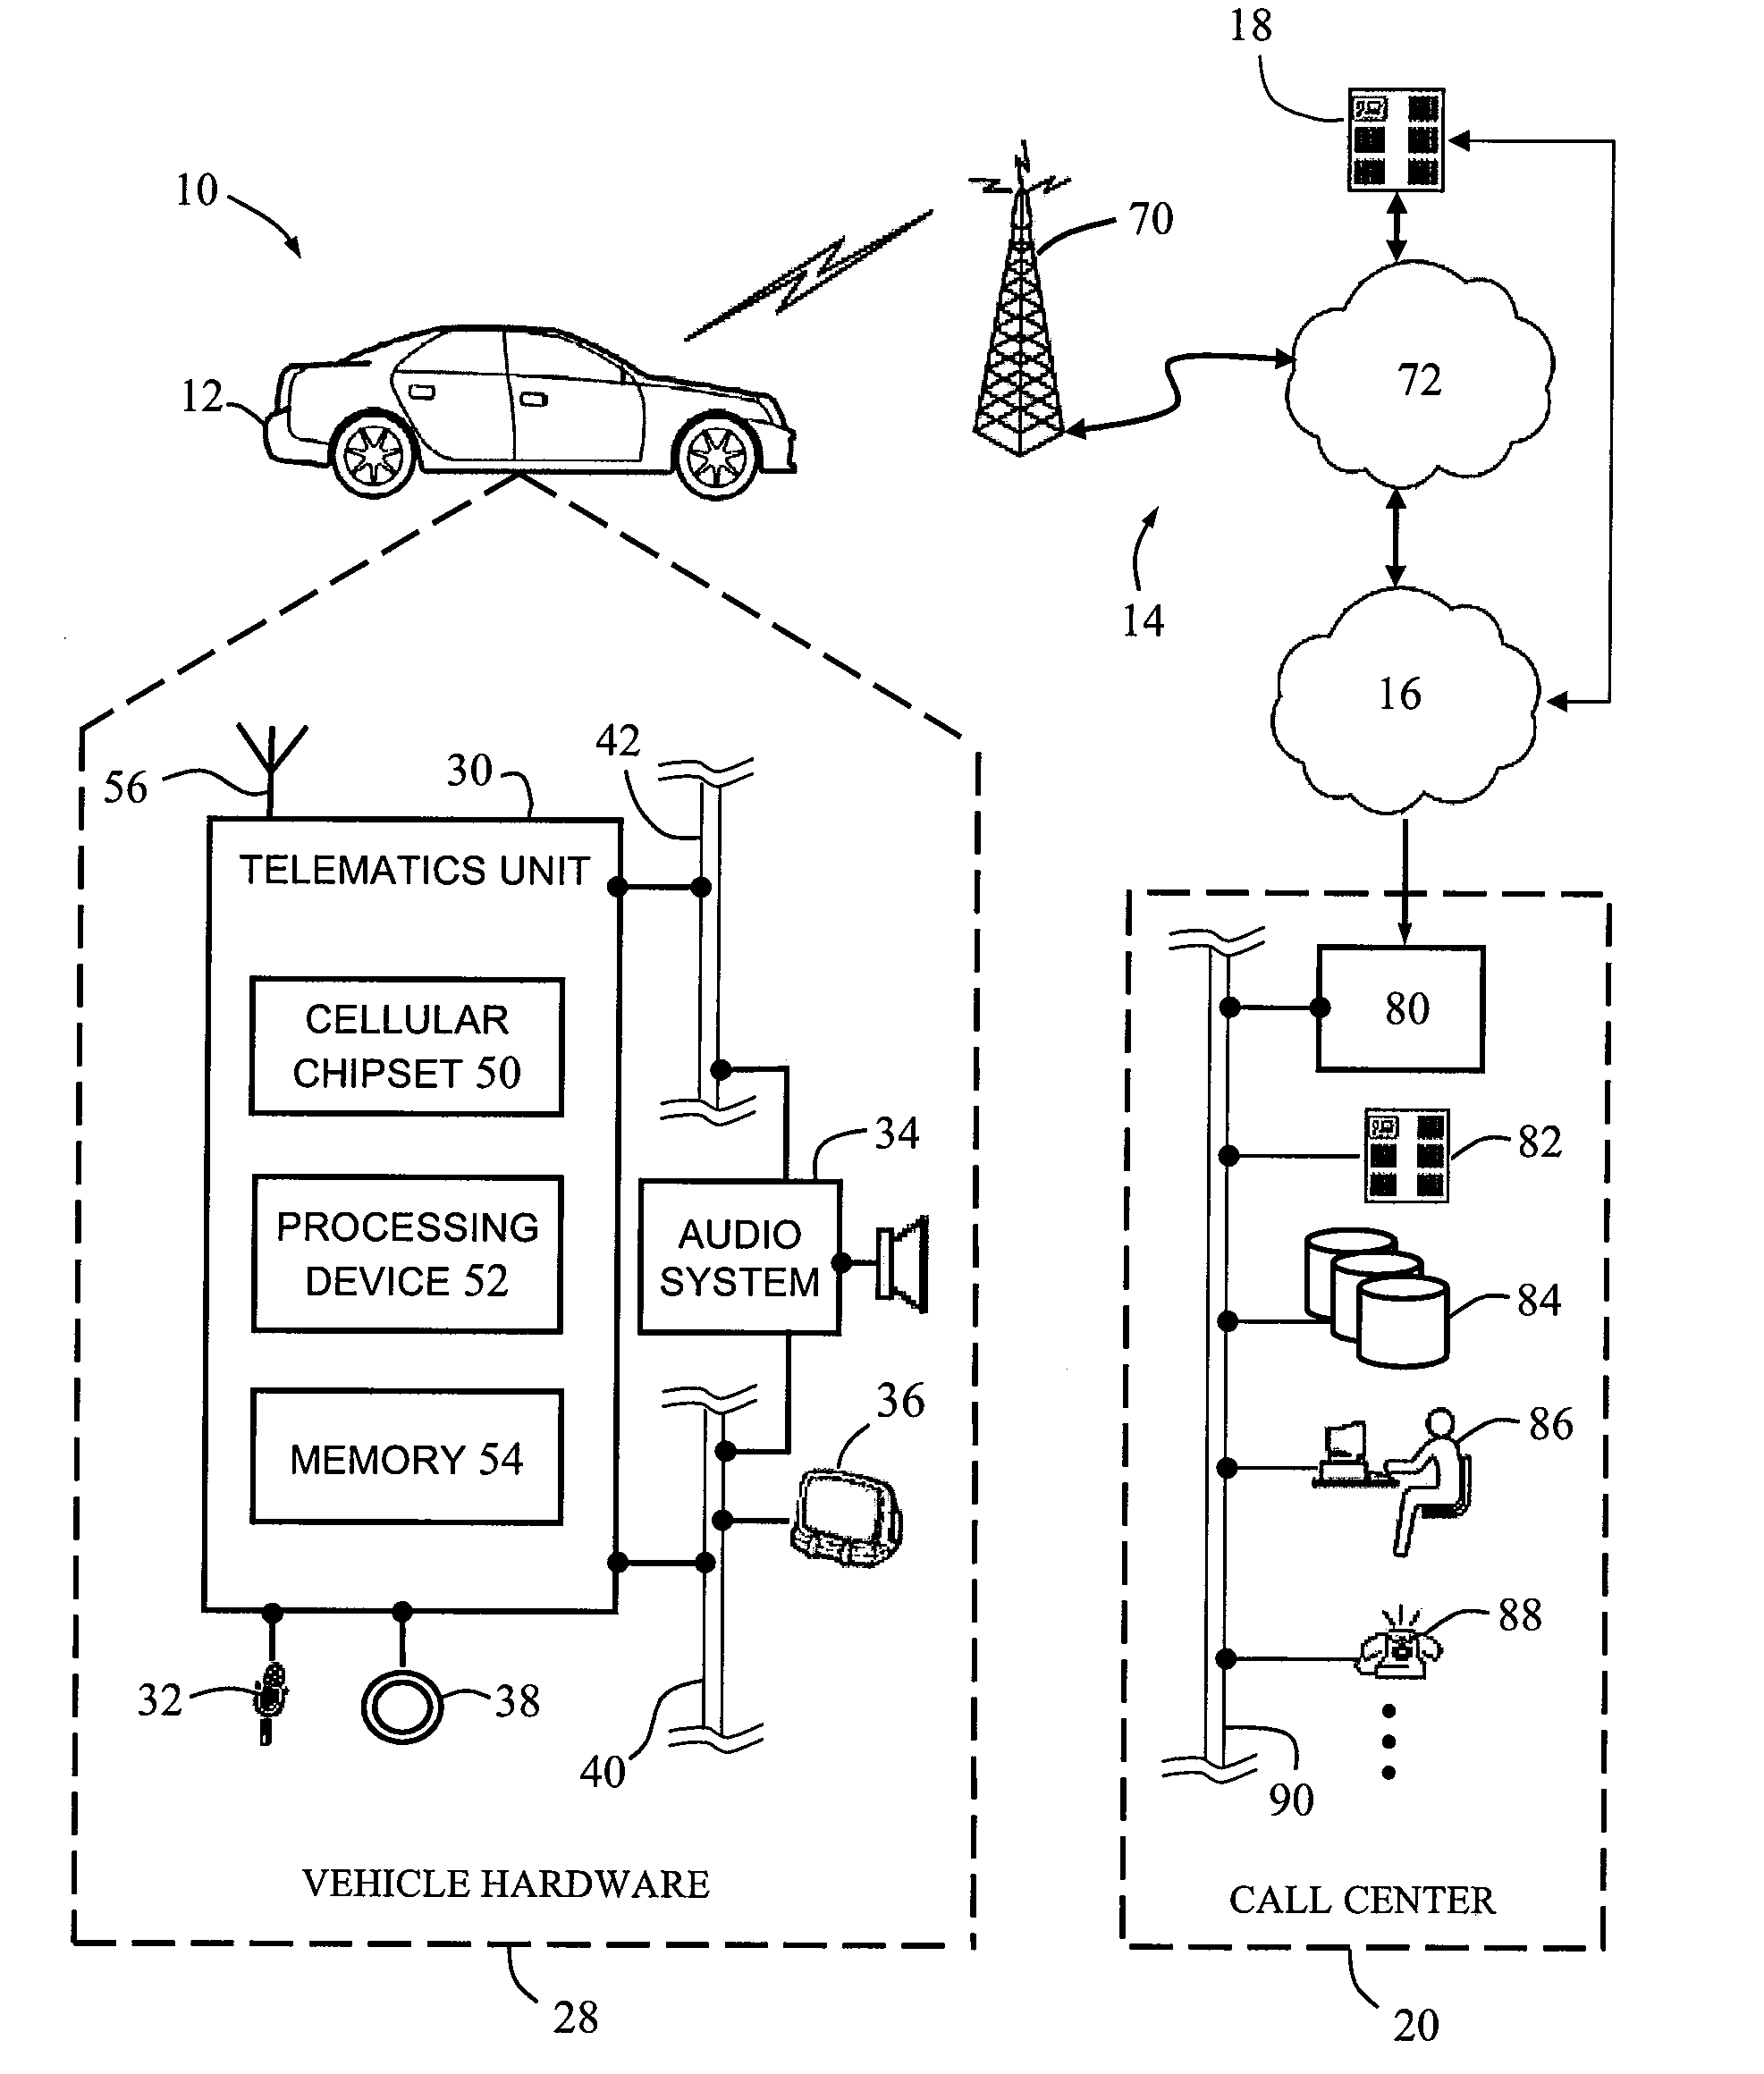 Method of establishing a data connection with a telematics-equipped vehicle